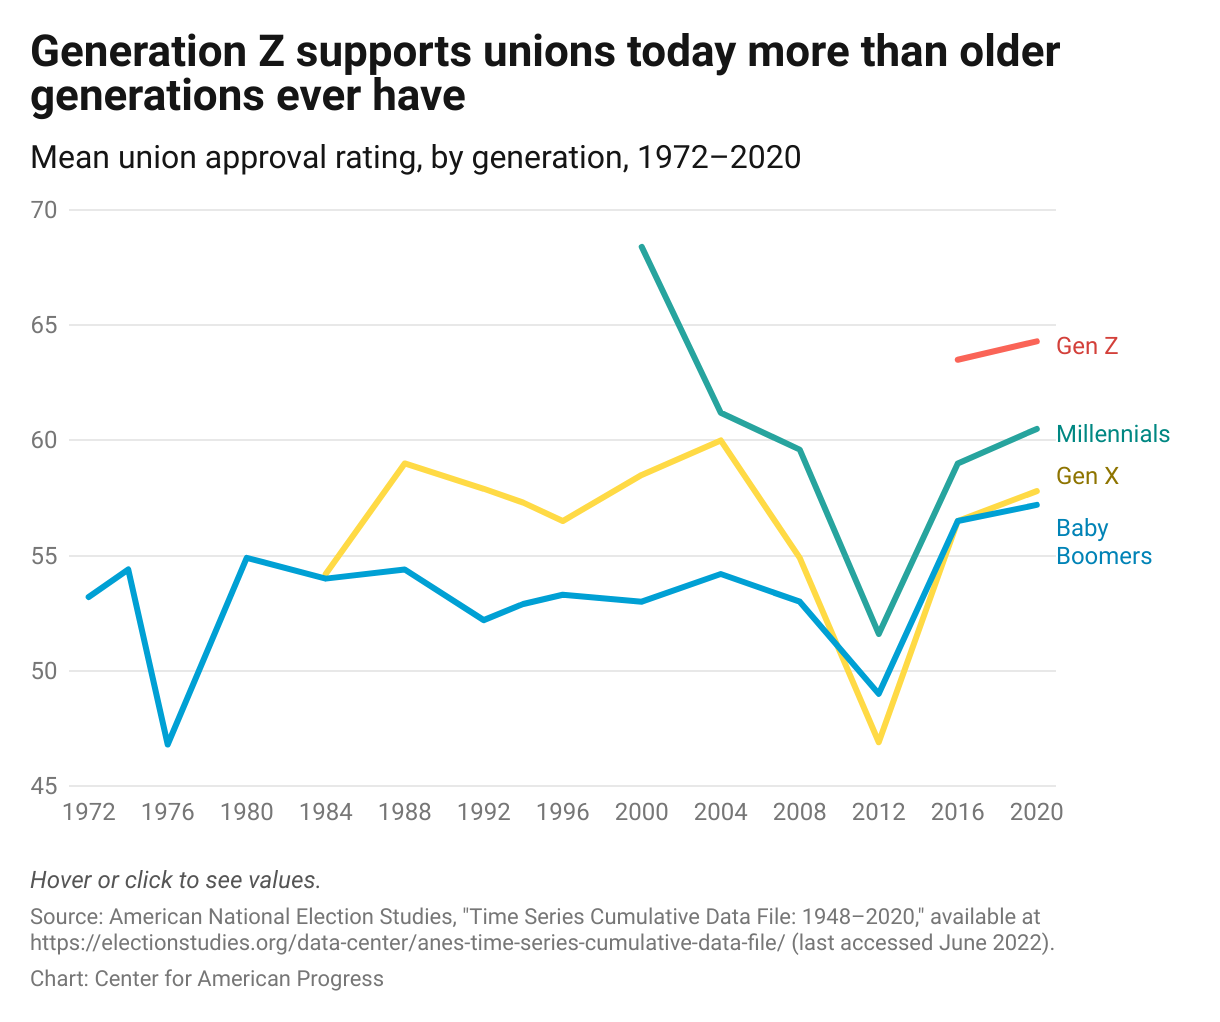 Line chart showing the greater union approval rating among Gen Z and Millennials compared with older generations, with Gen Zers and Millennials reaching an approval rating of 64.3 percent and 60.5 percent compared with 57.8 percent among Gen Xers and 57.2 percent among Baby Boomers in 2020.